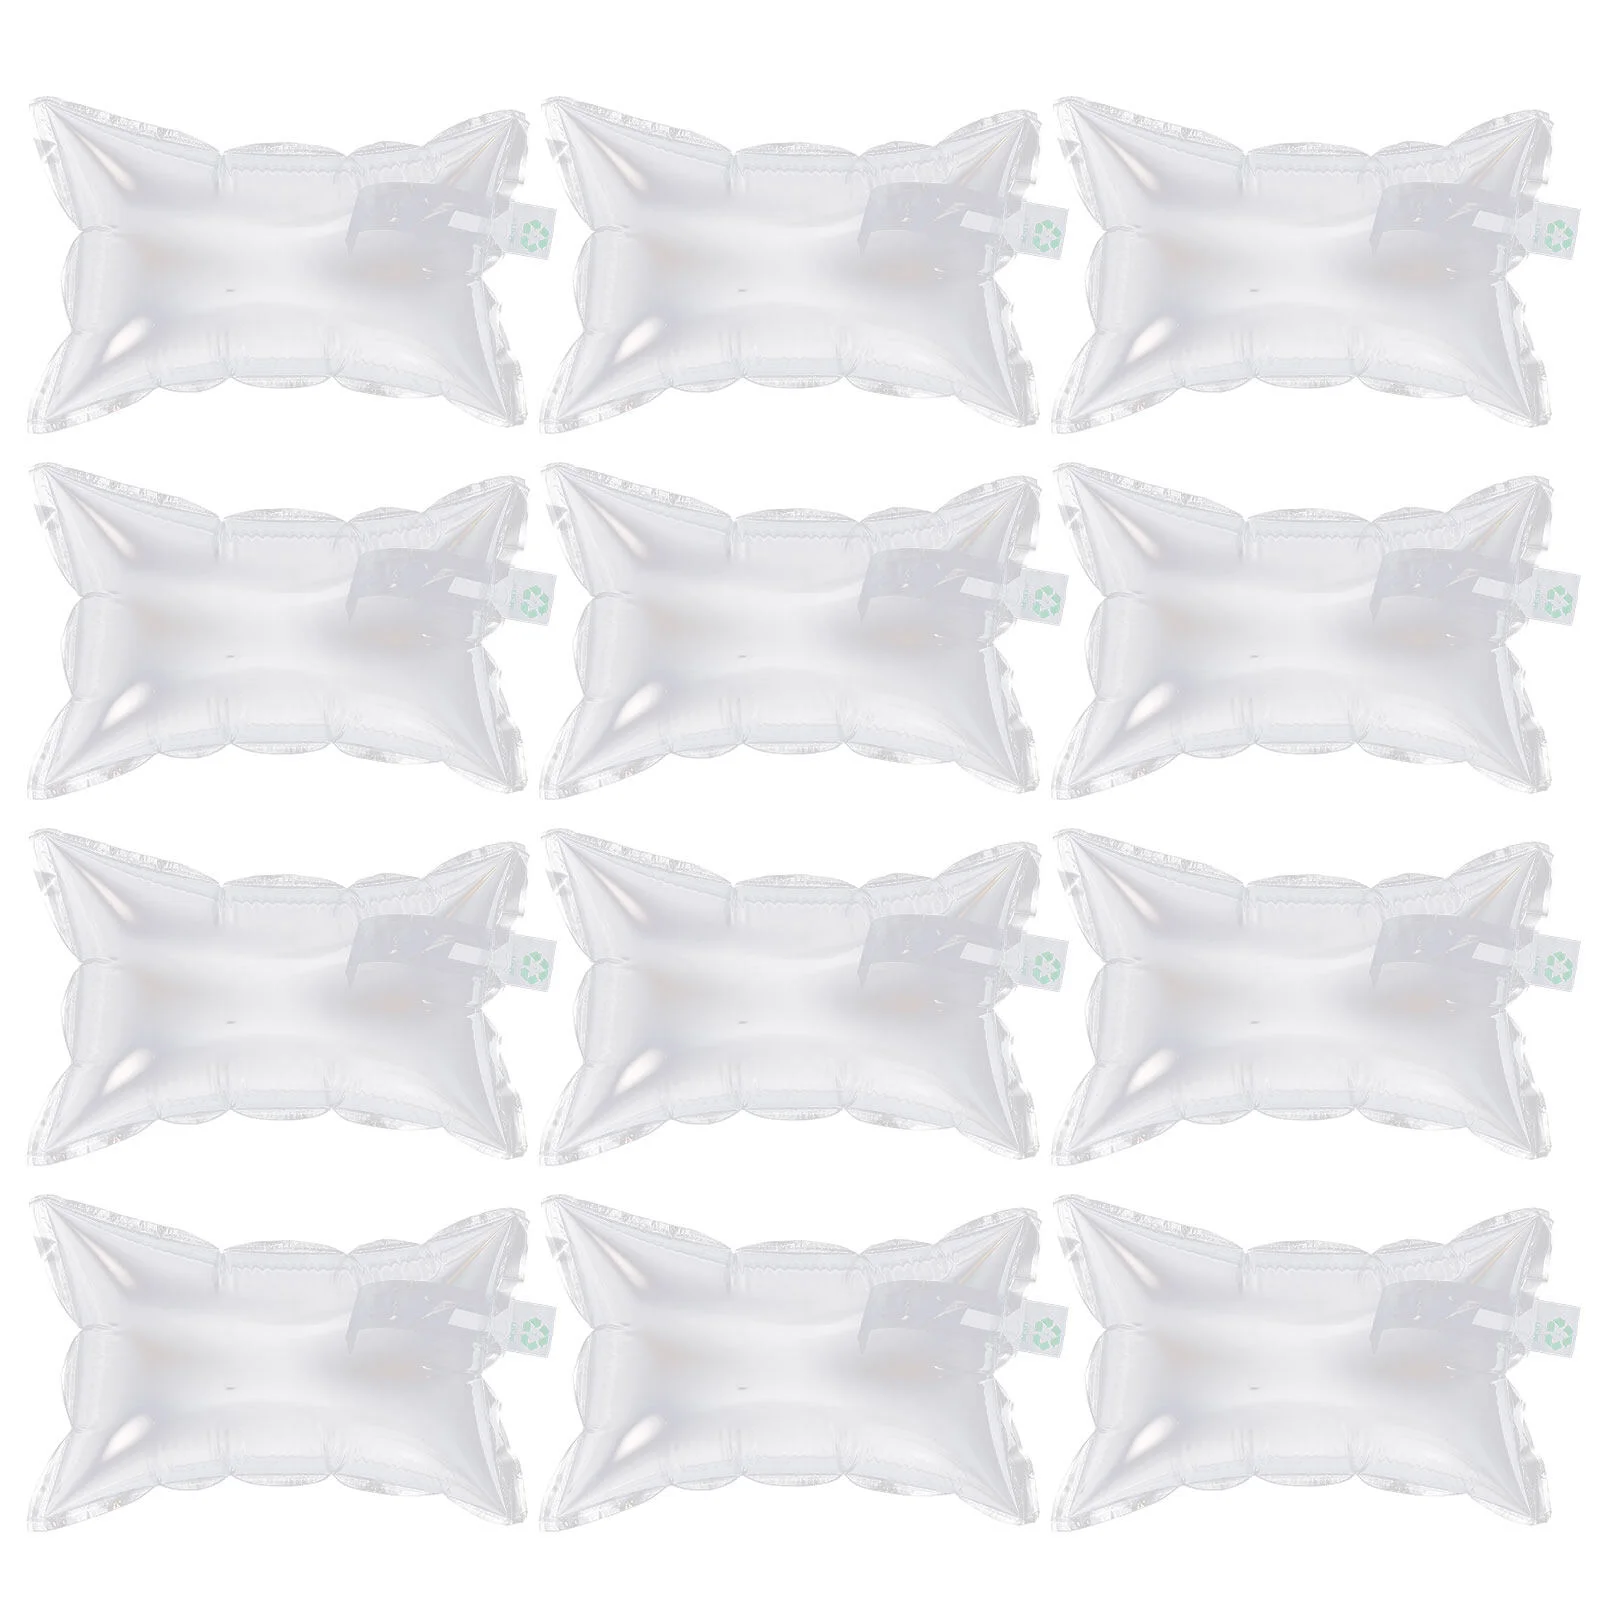 

30pcs Air Bubble Bag Plastic Envelope Air Pillows Wrap Packing Roll Bubble Mailing Filler for Shipping and Packaging